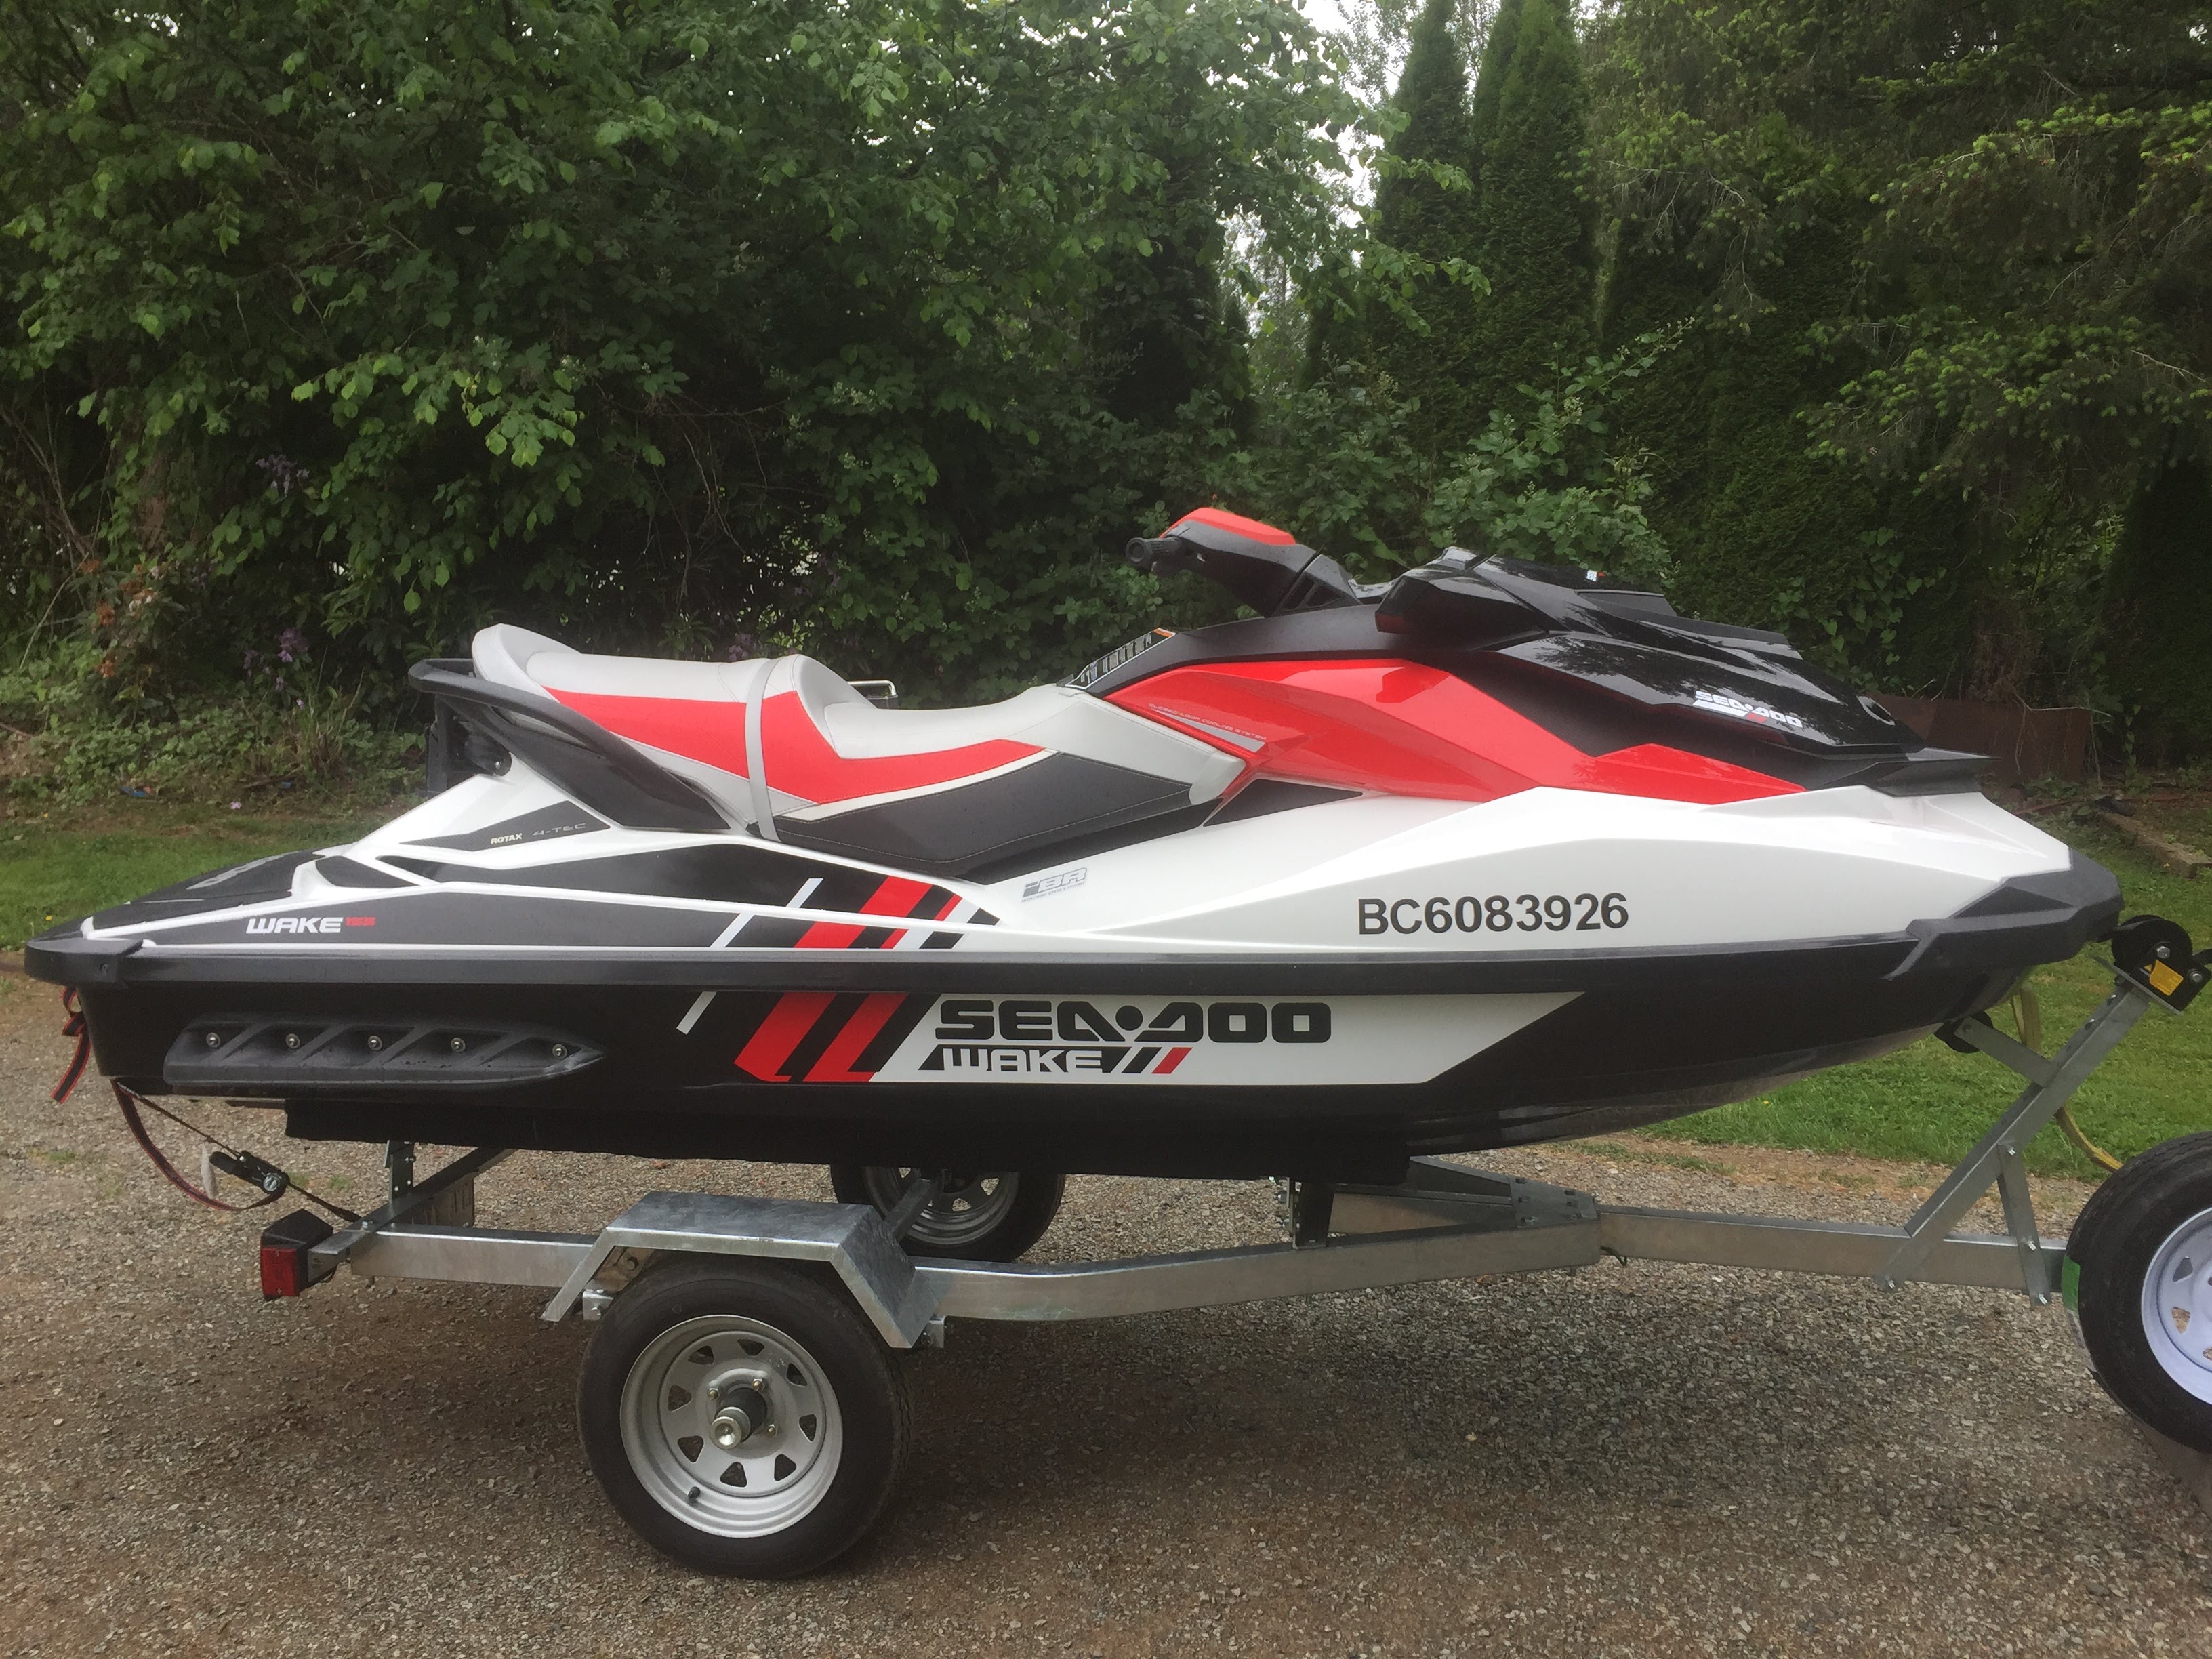 Sea Doo gel coat and fiberglass repairs, yearly maintenance and decals for a Langley BC customer from MRV Marine Services